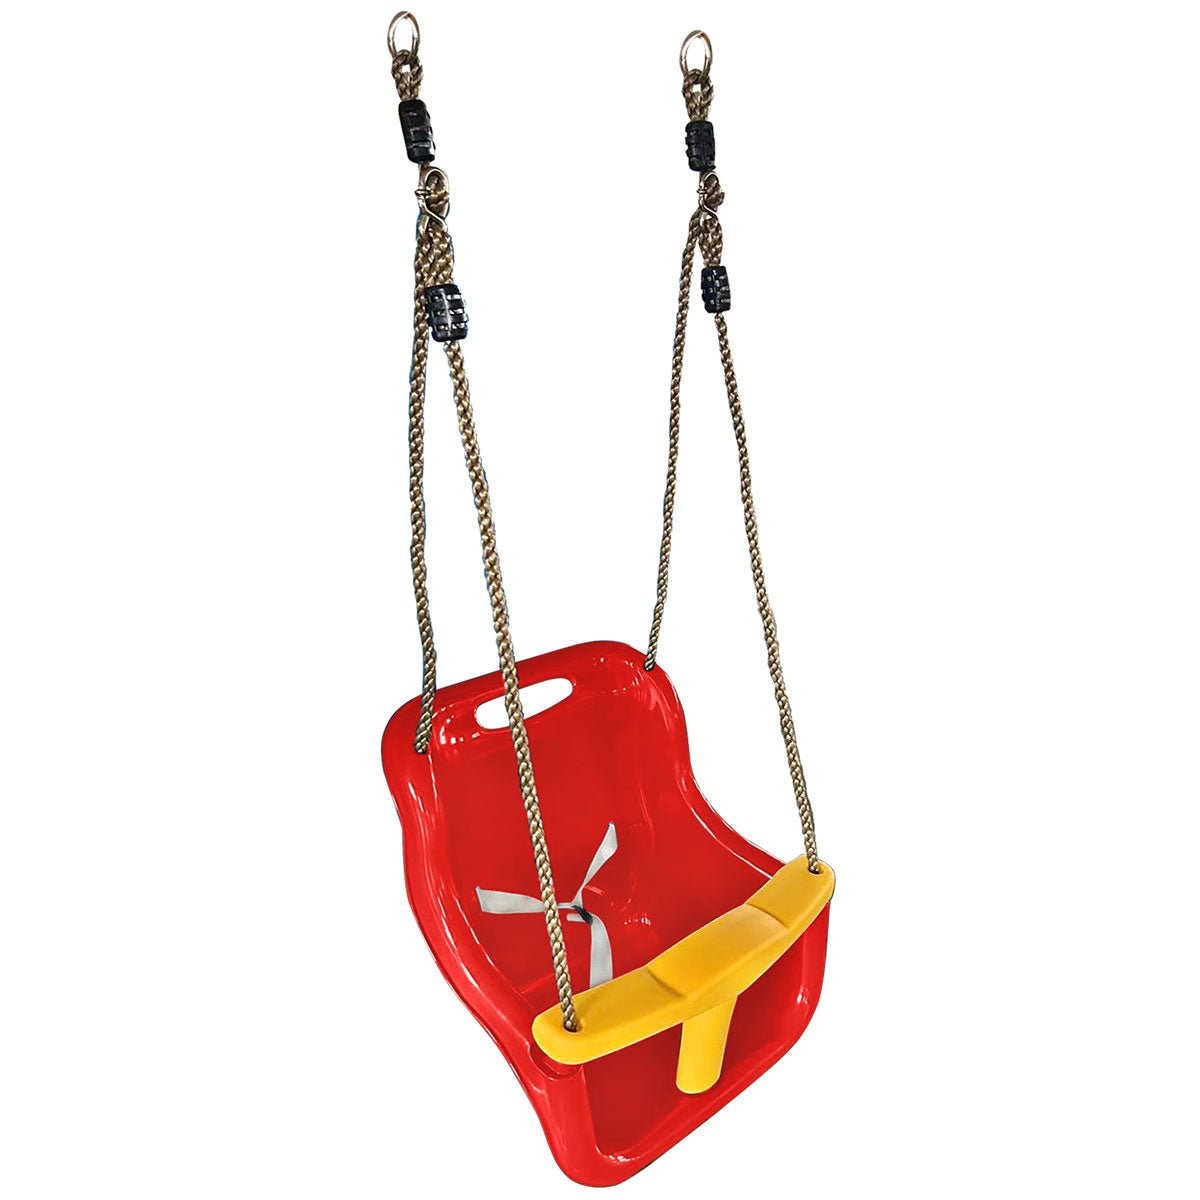 hort Rope Swing Attachment for Babies - Easy Installation